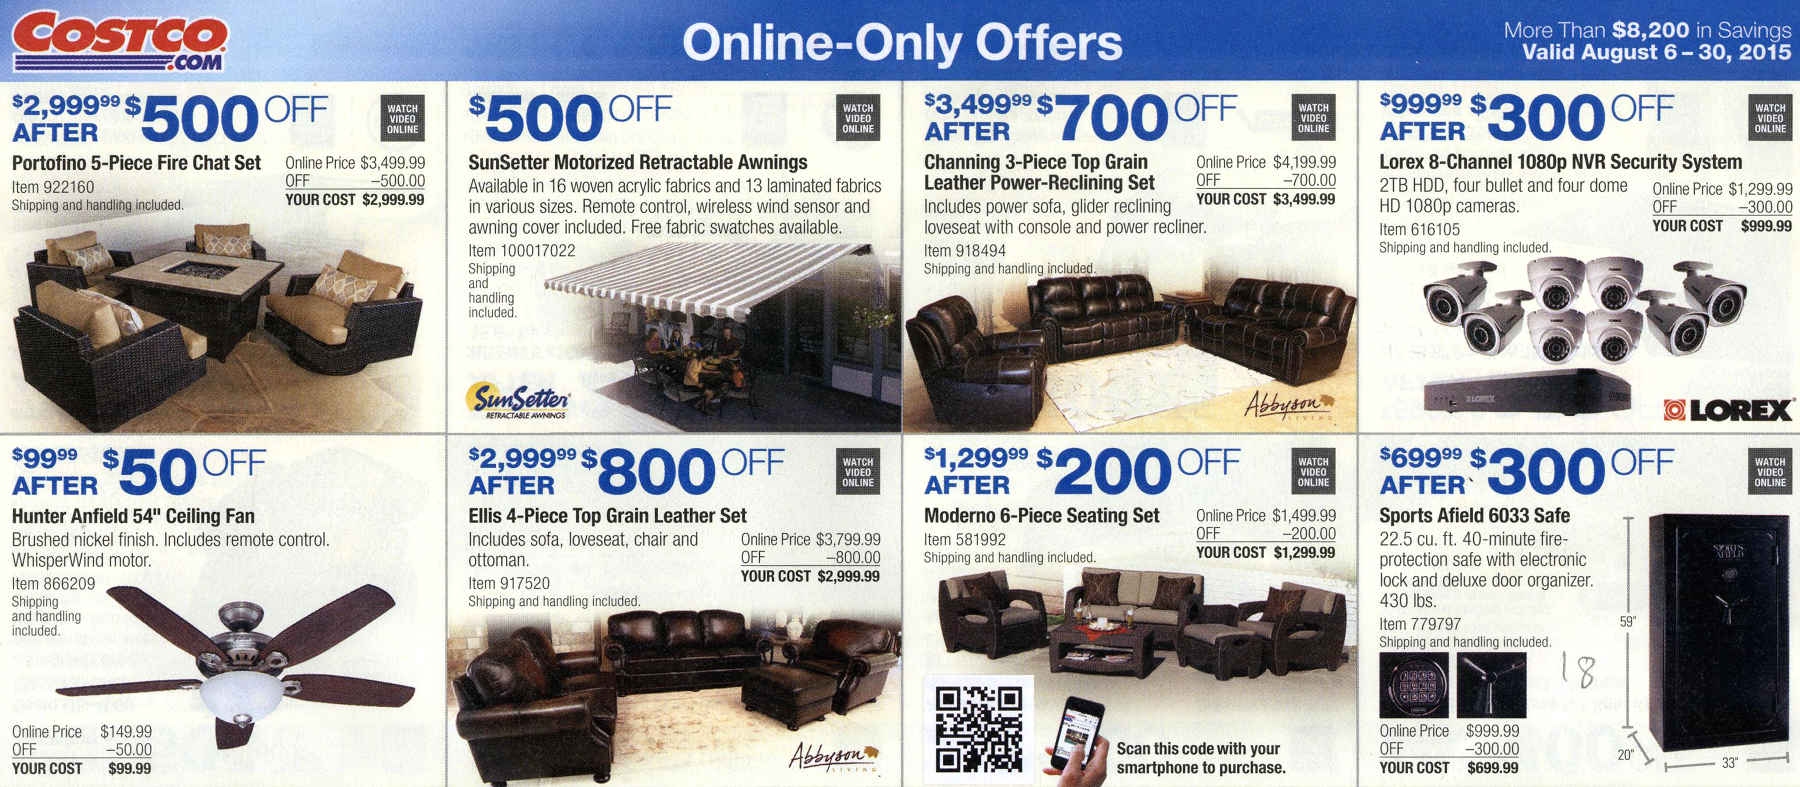 Coupon book full size page -> 18 <-